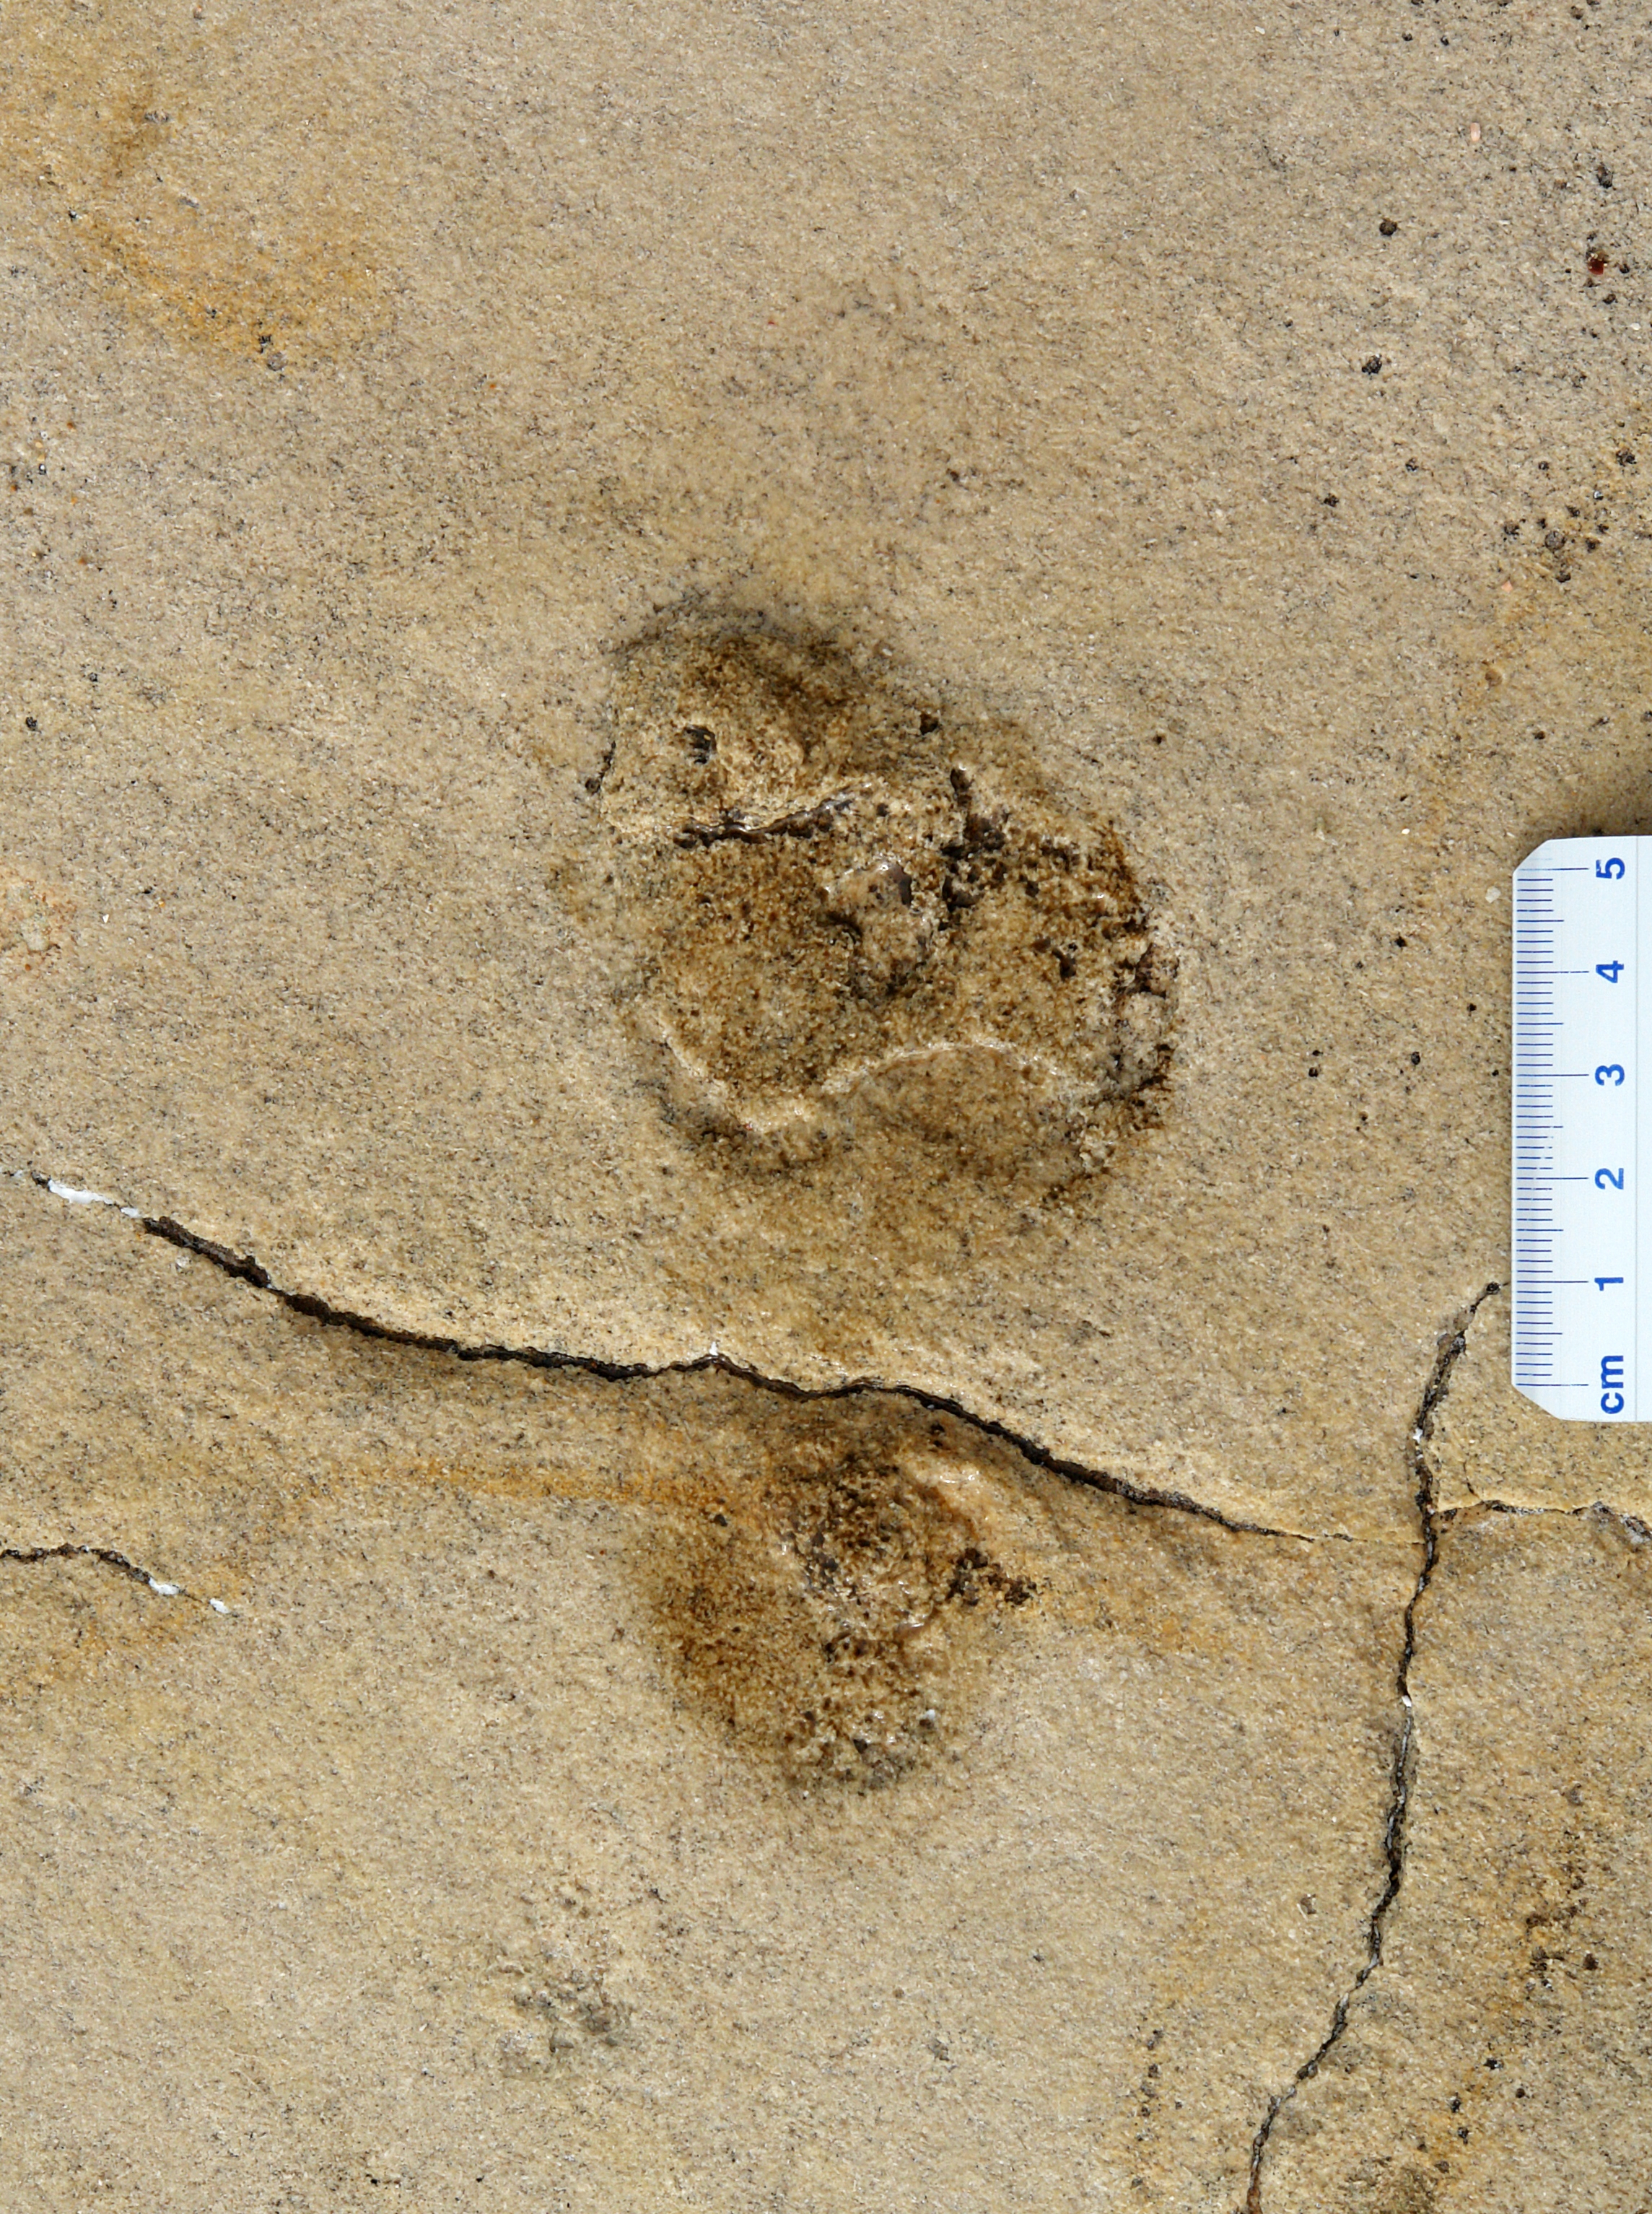 This closeup, taken in November 2010, shows the first footprint in the slab that Gierlinski recognized as being similar in shape to his own. (Submitted by Gerard Gierlinski)